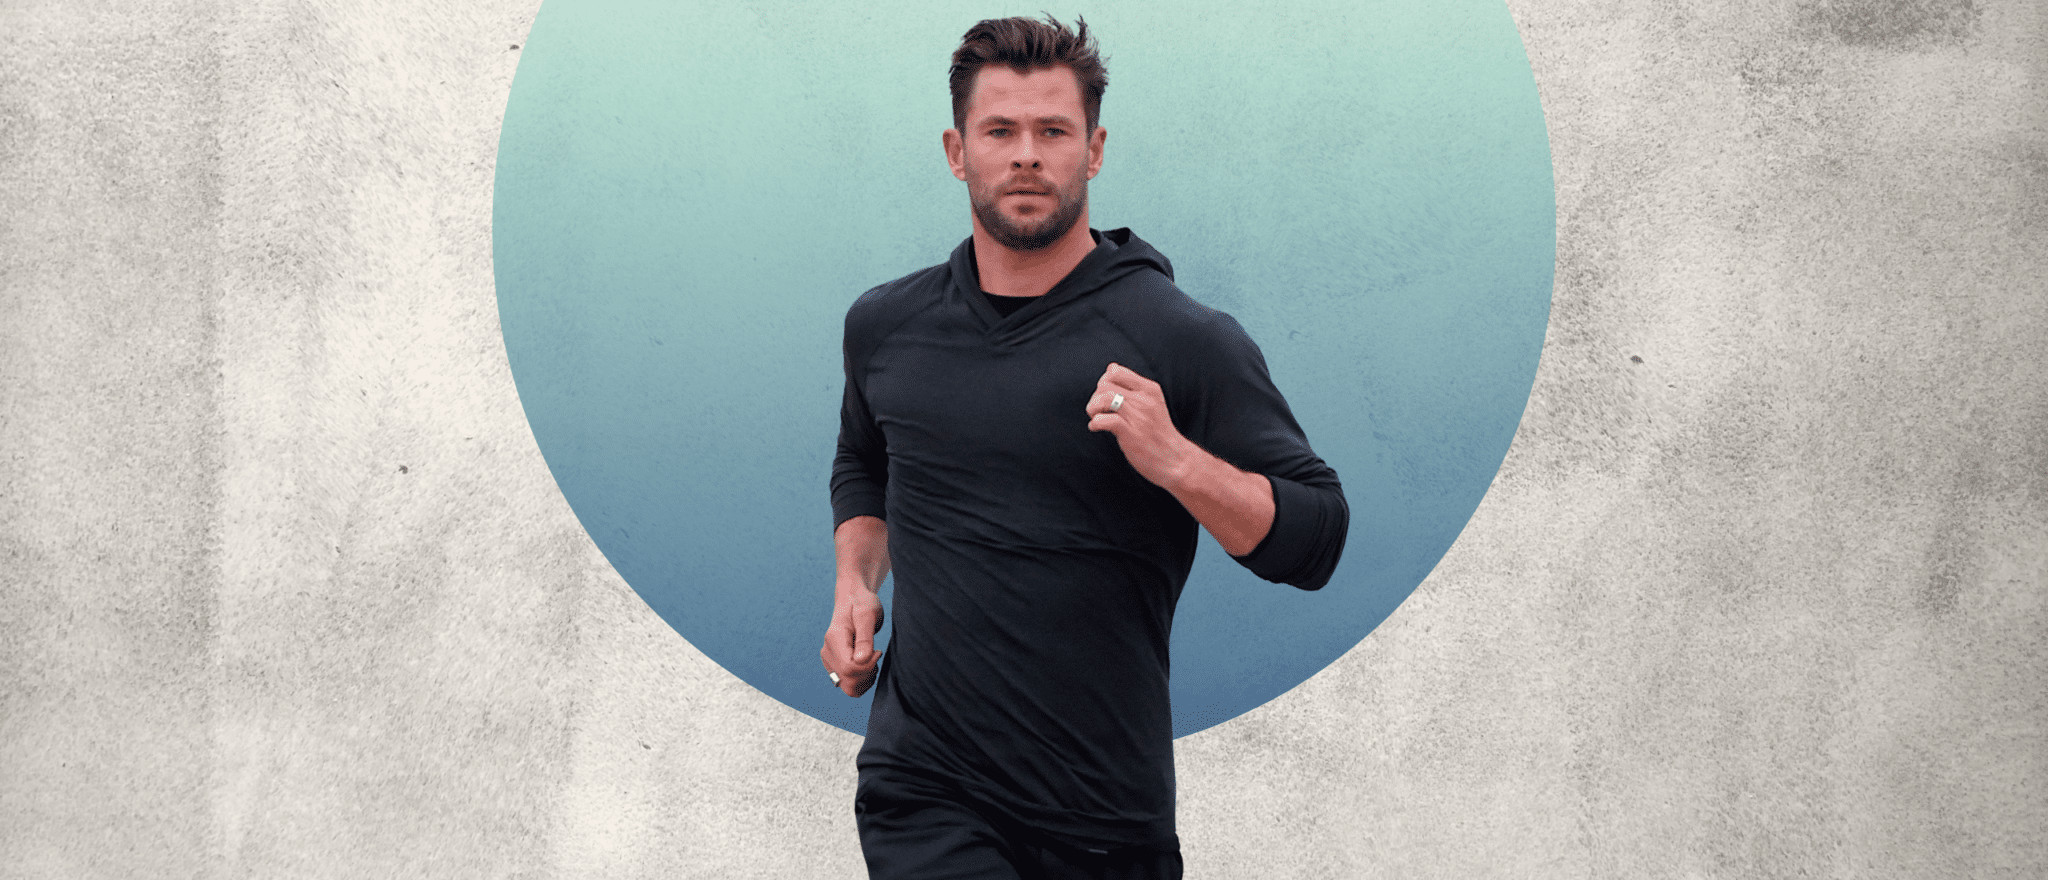 Chris Hemsworth’s Sprint Workout Torches Fat. But Its Other Benefit Is Way More Impressive.